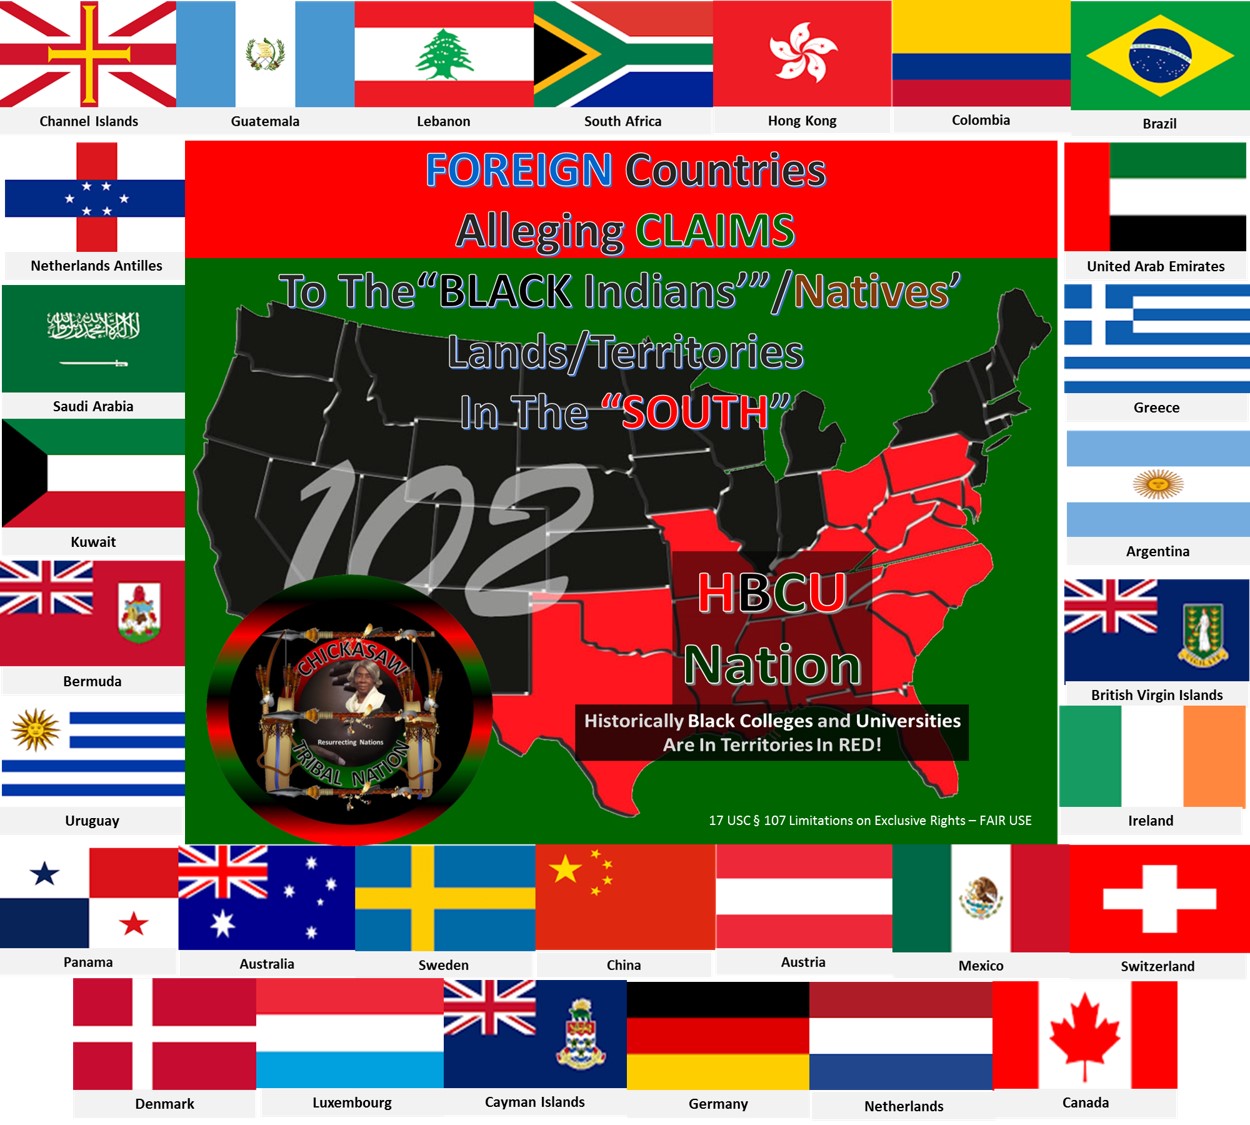 FOREIGN Interests In BLACK Indians LANDS In USA SOUTH 02